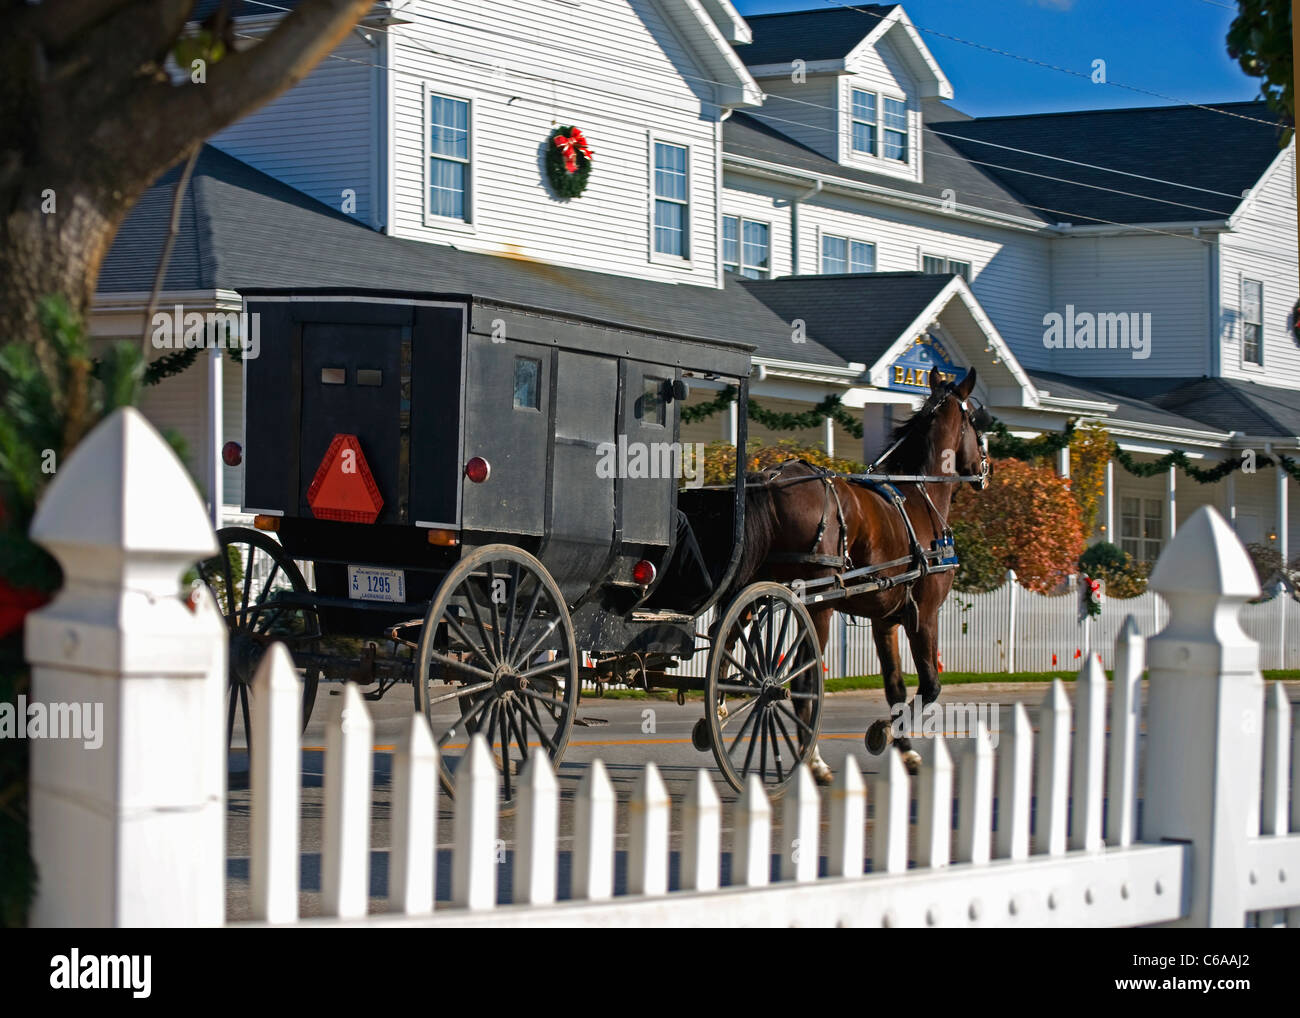 Amish buggy  passing by the famous Blue Gate Restaurant and Bakery, popular for its Amish food, in Shipshewana, Indiana. Stock Photo